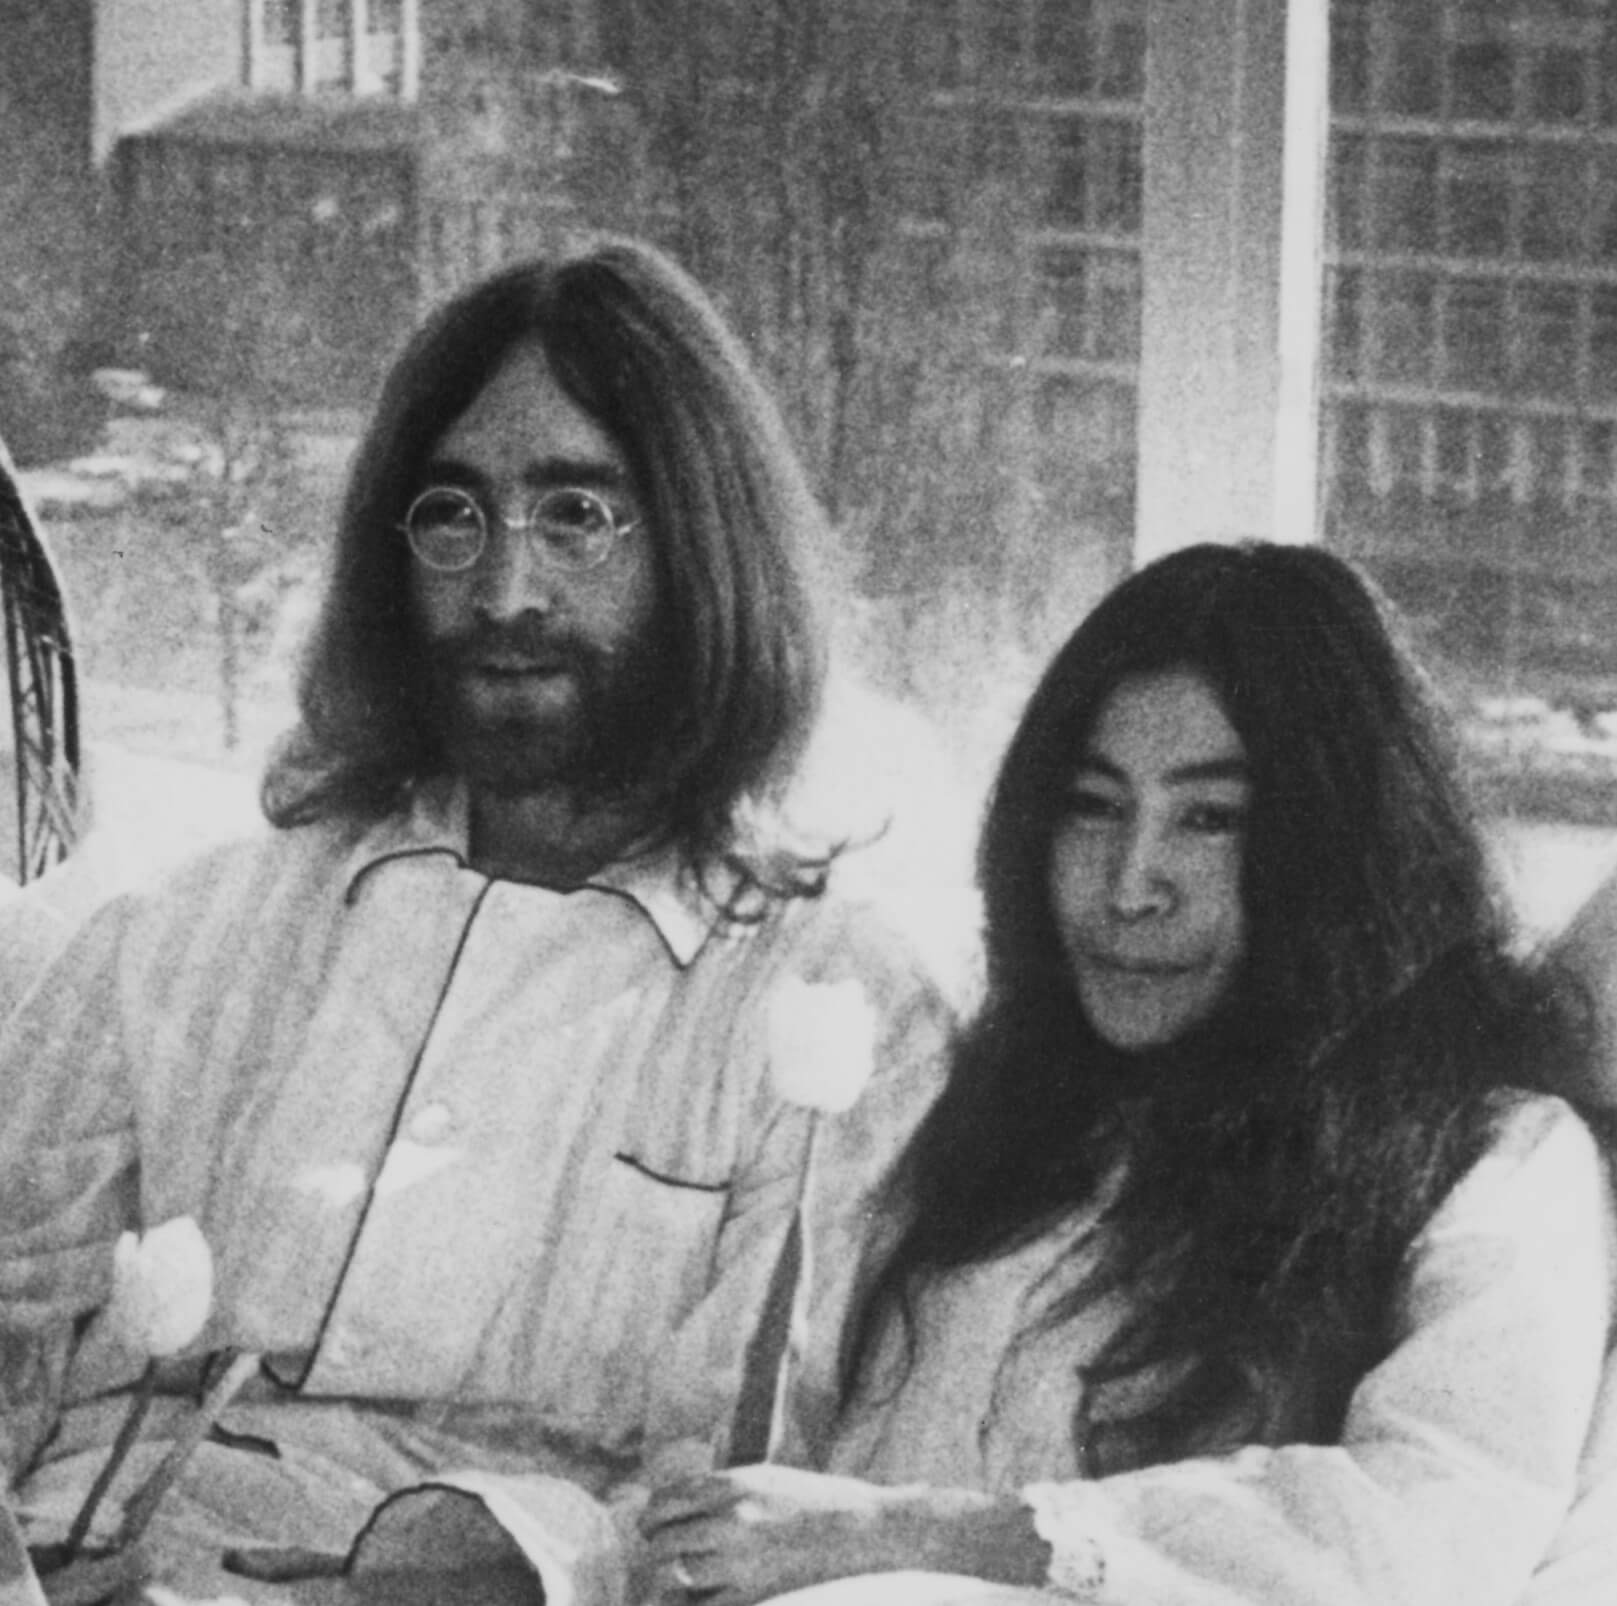 John Lennon and Yoko Ono in bed during the "Give Peace a Chance" era